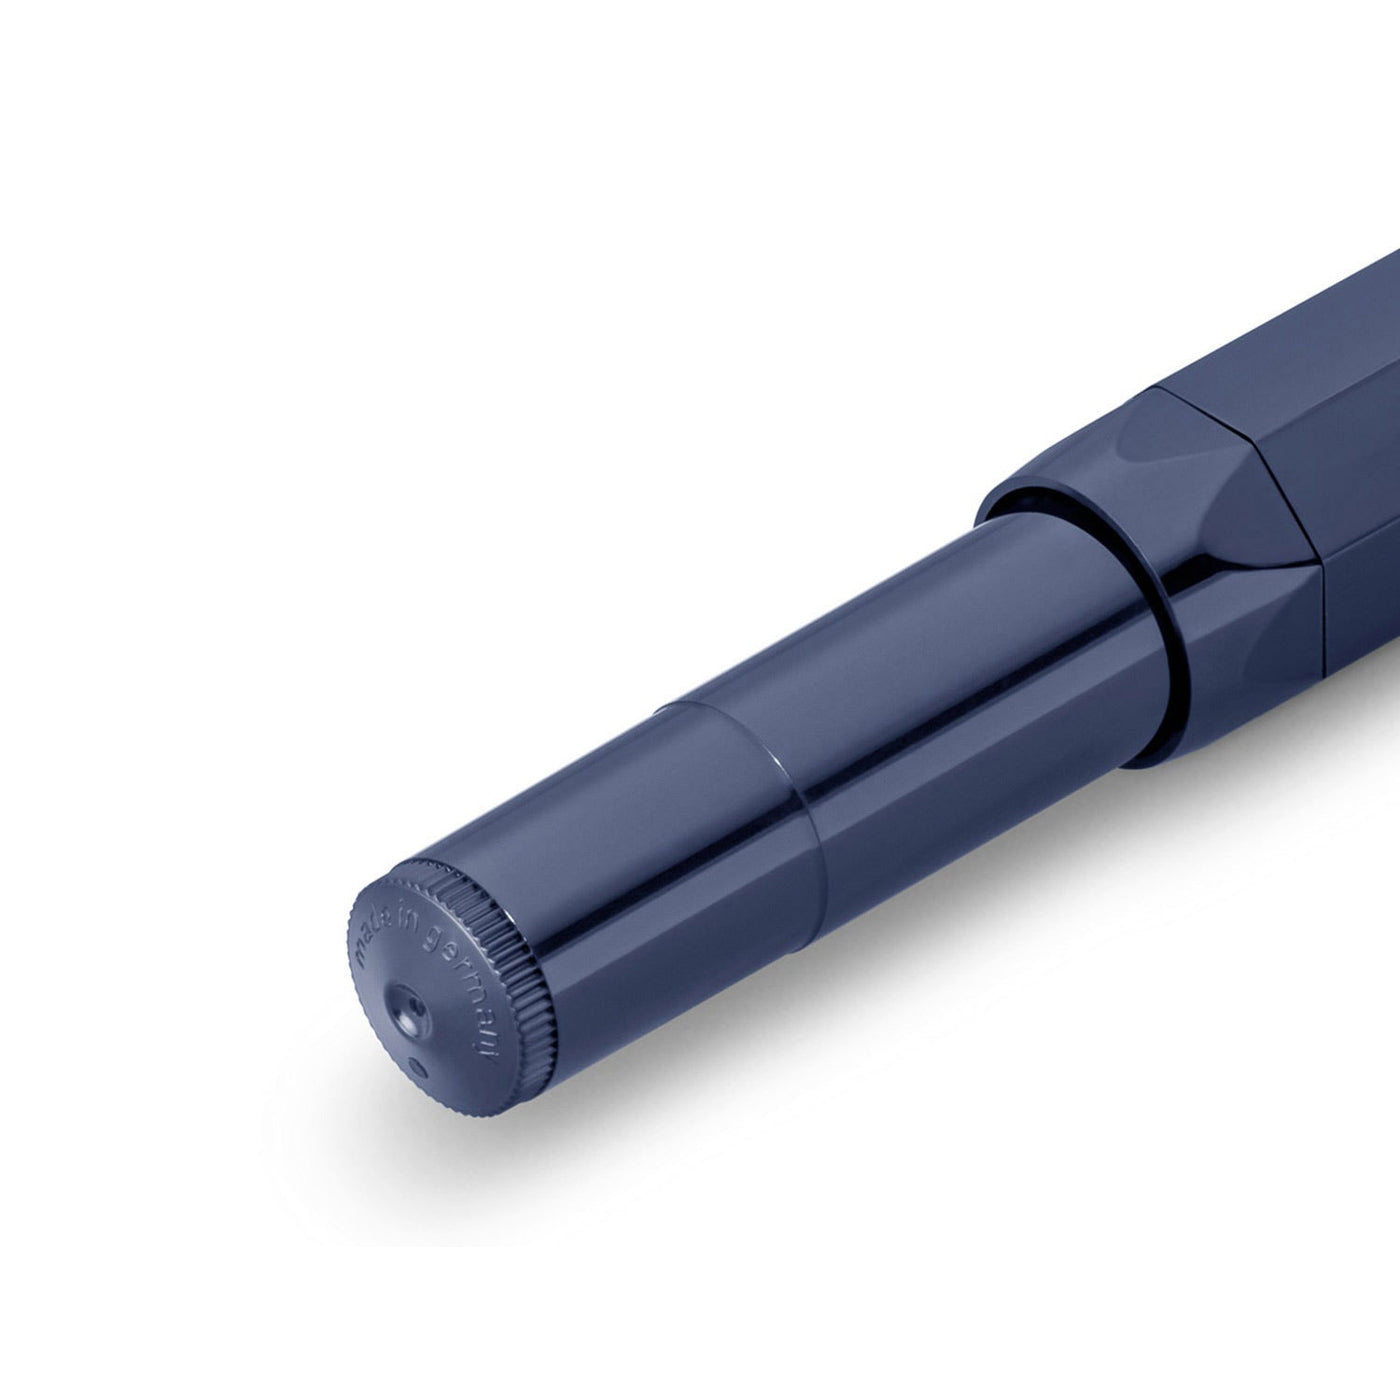 Kaweco Classic Sports Roller Ball Pen, Navy